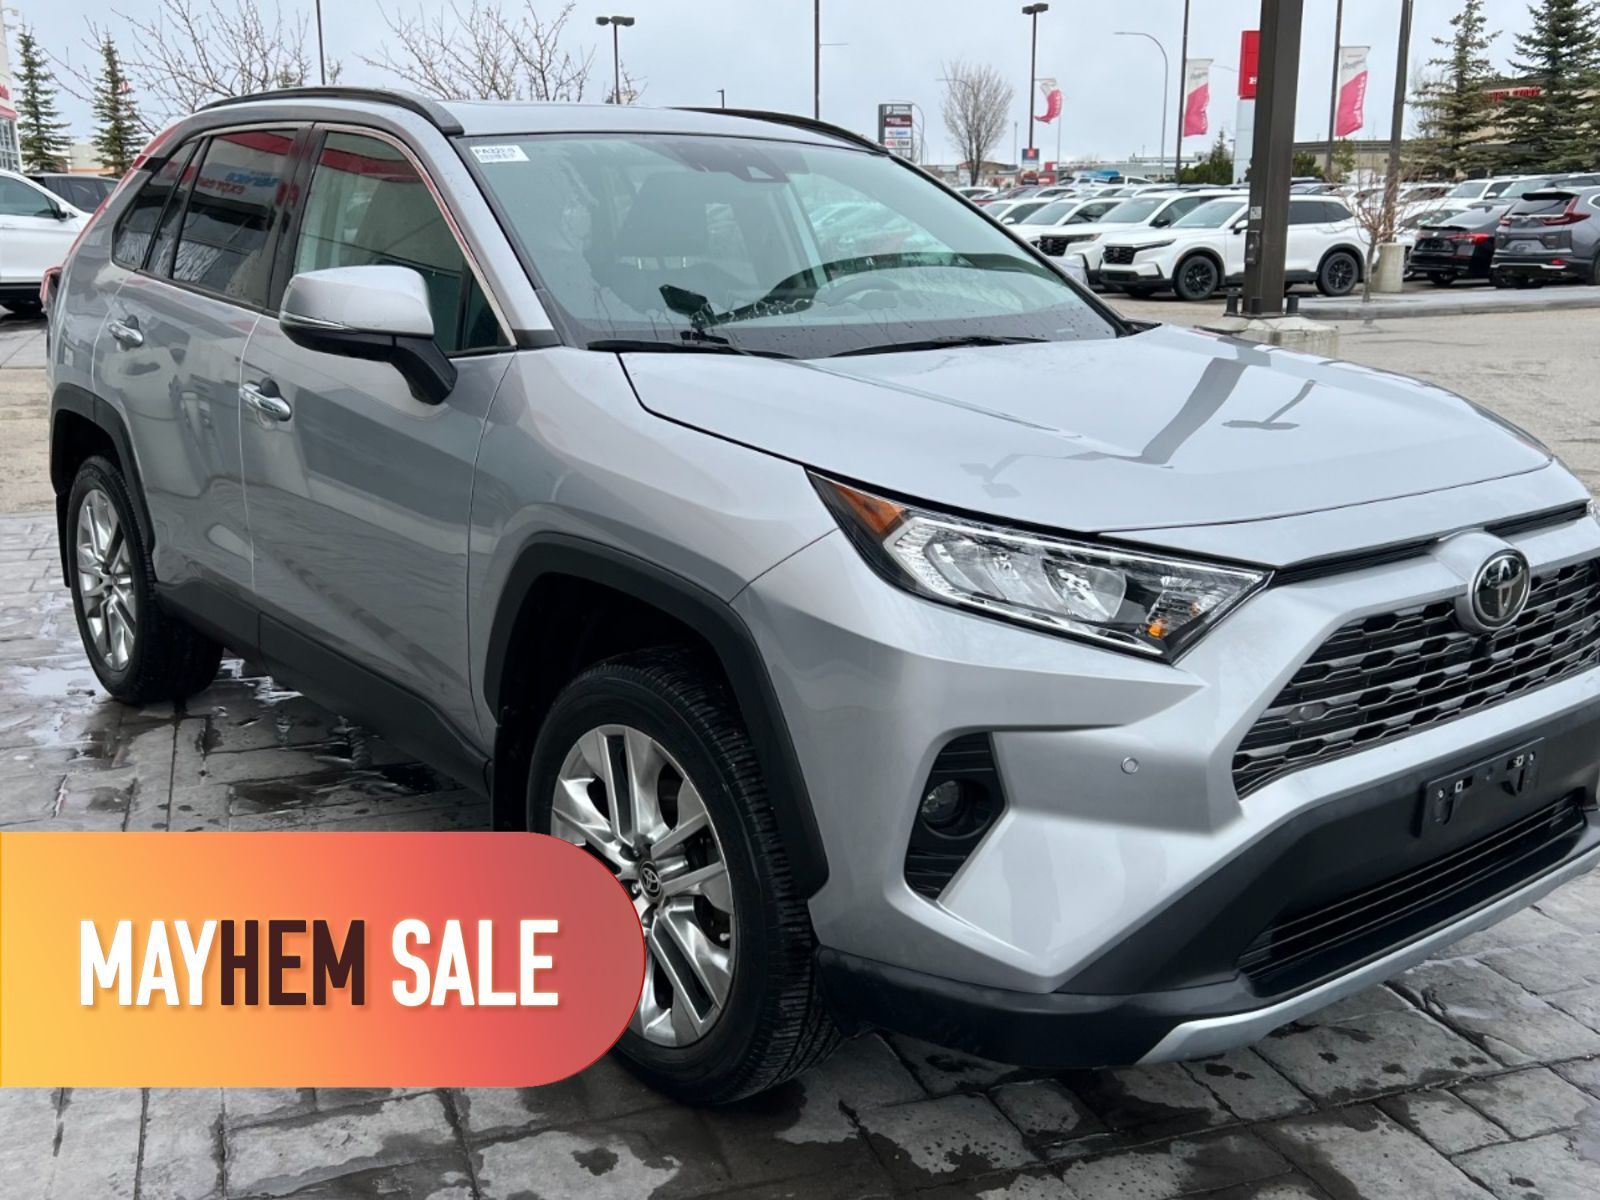 2021 Toyota RAV4 Limited - Low Kms, Heated Seats, Navigation System